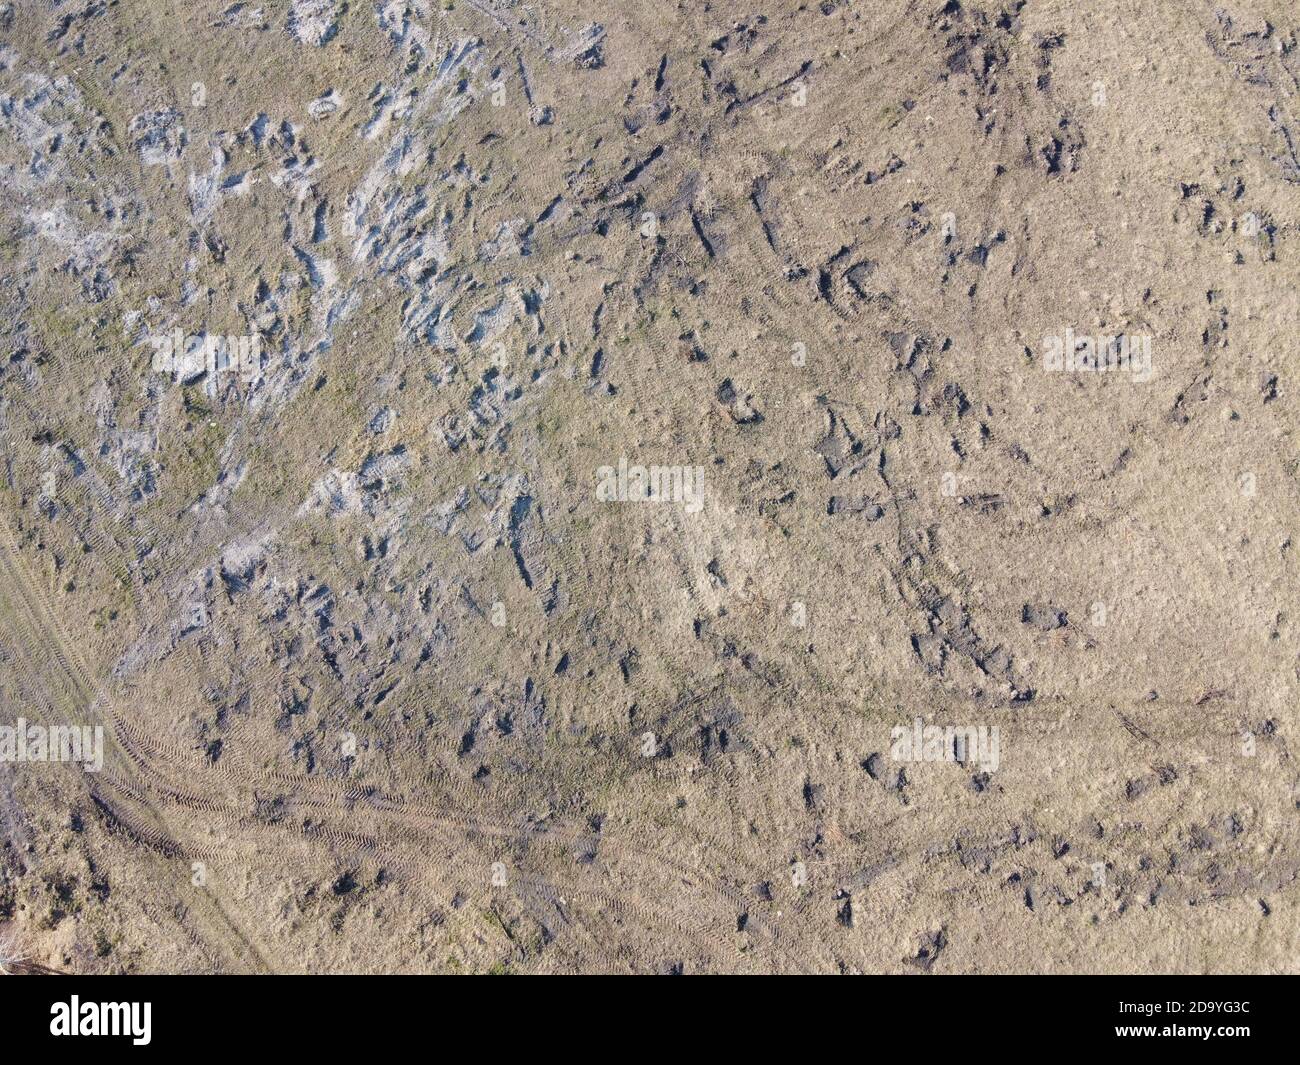 Traces of construction equipment on the soil, aerial view. Lifeless land, wasteland. Stock Photo